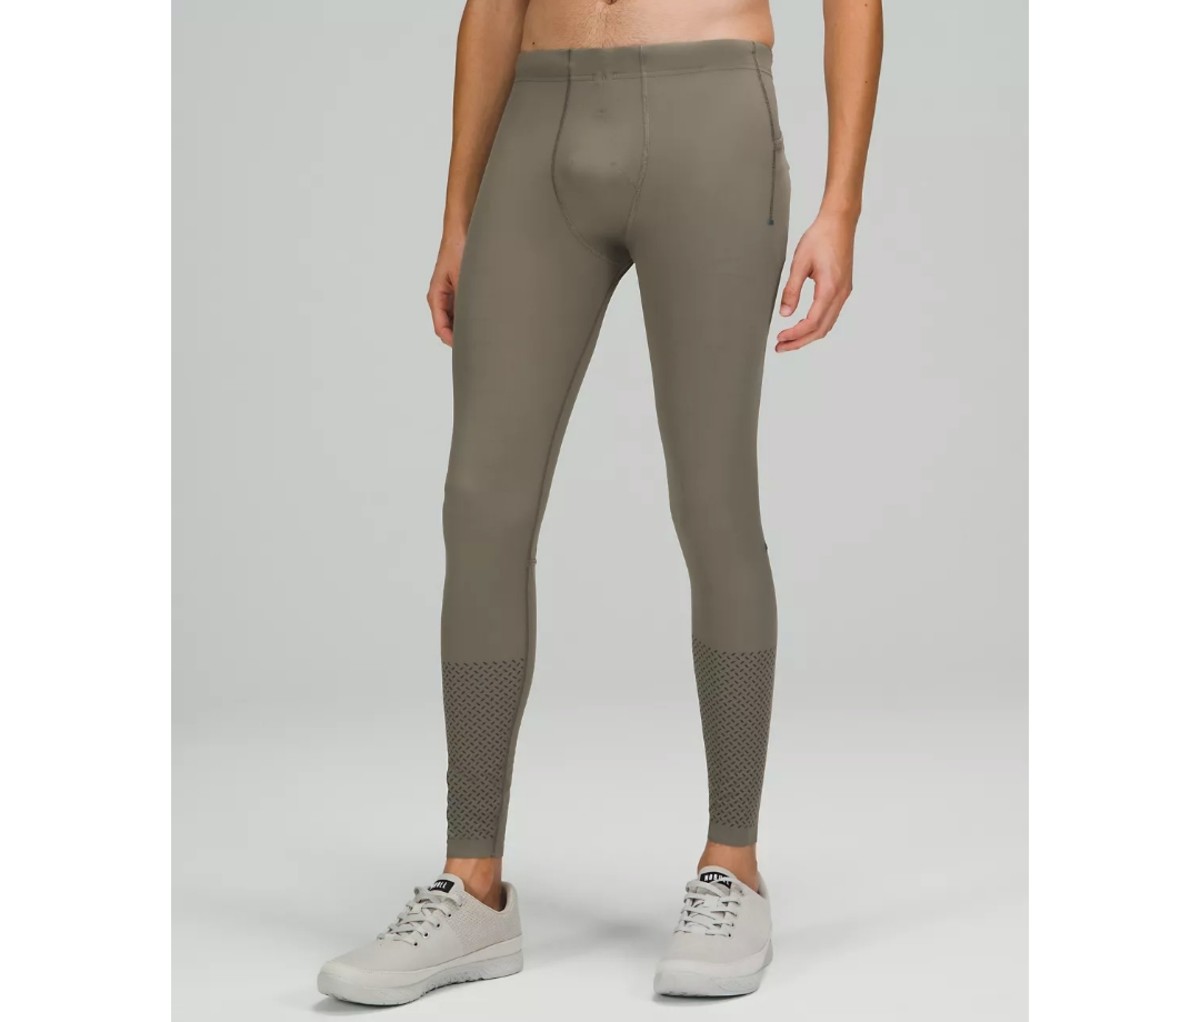 Avolt Athleisure Lycra Track Pants For Men i Slim-Fit Joggers Track Pant  For Sports, Gym And Running at Rs 150/piece | Lycra Pant in Kolkata | ID:  2851251611548